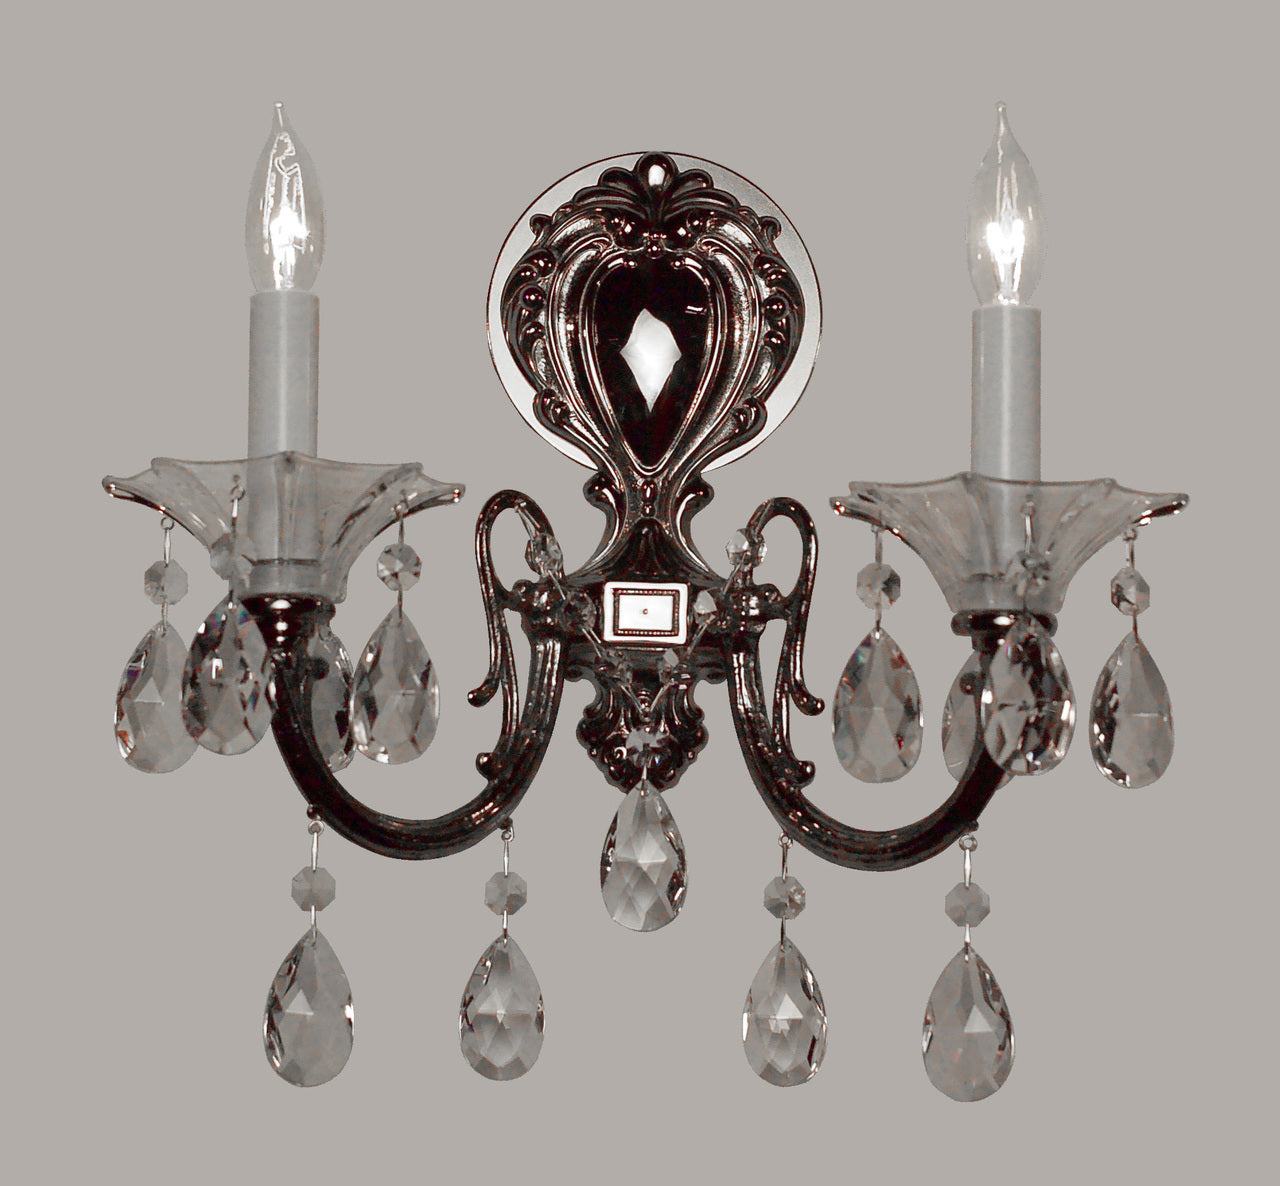 Classic Lighting 57052 CHP S Via Lombardi Crystal Wall Sconce in Champagne Pearl (Imported from Spain)